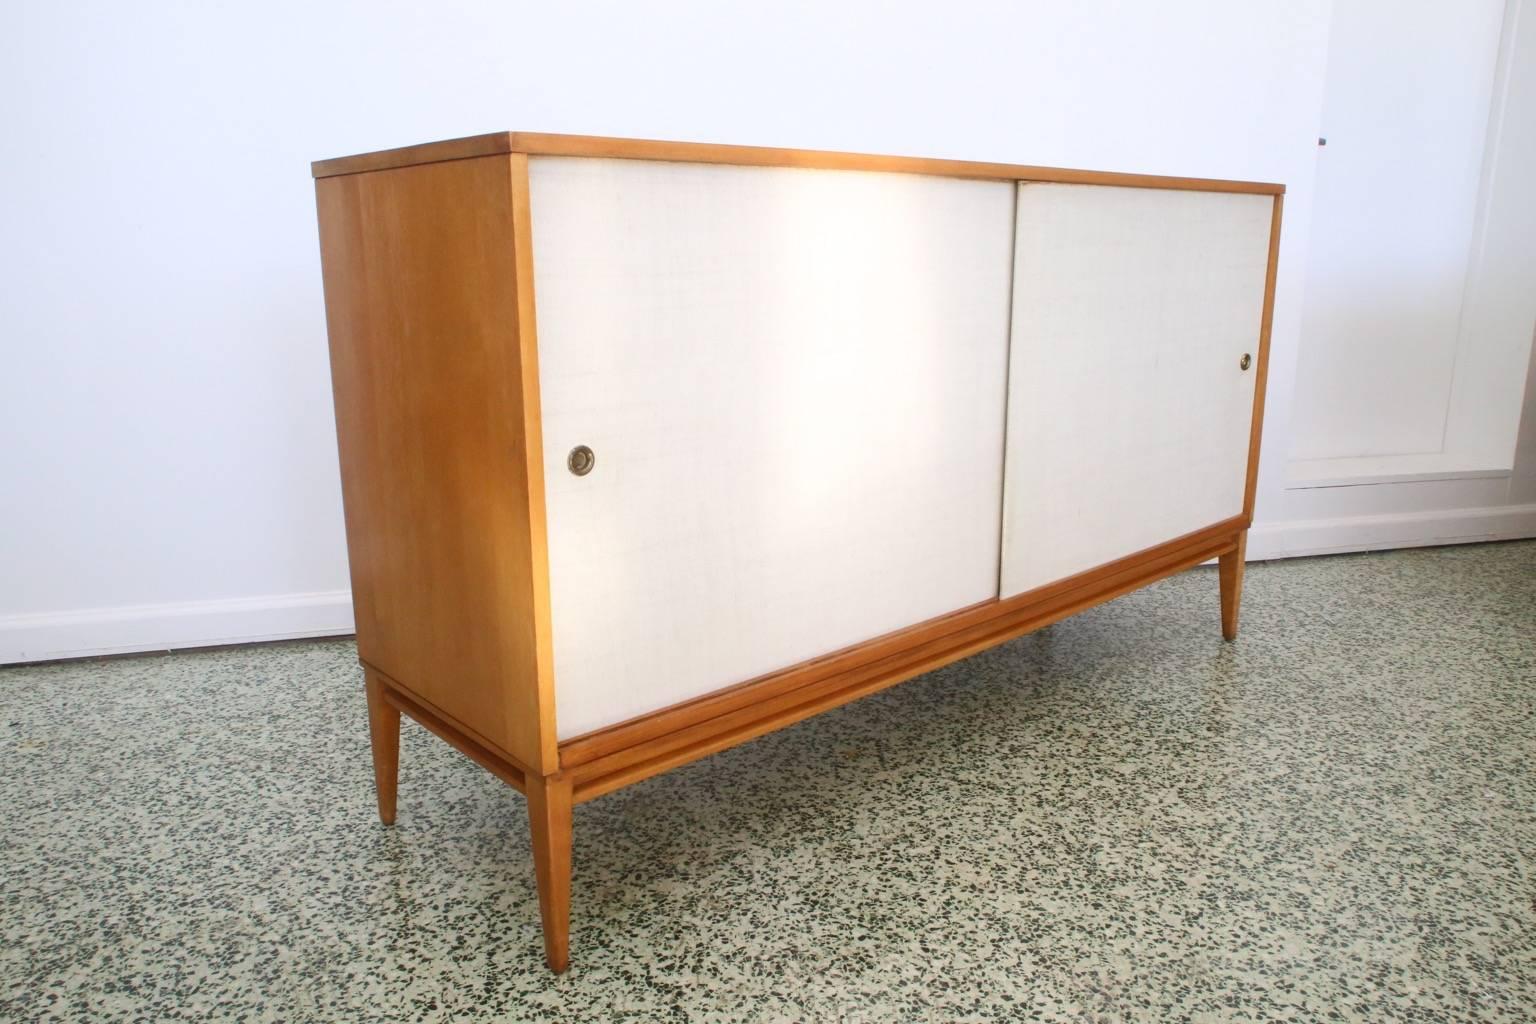 Very nice credenza with grass cloth doors with adjustable shelves and drawers designed by Paul McCobb for Winchendon. We have smaller companion piece listed separately on 1stdibs.